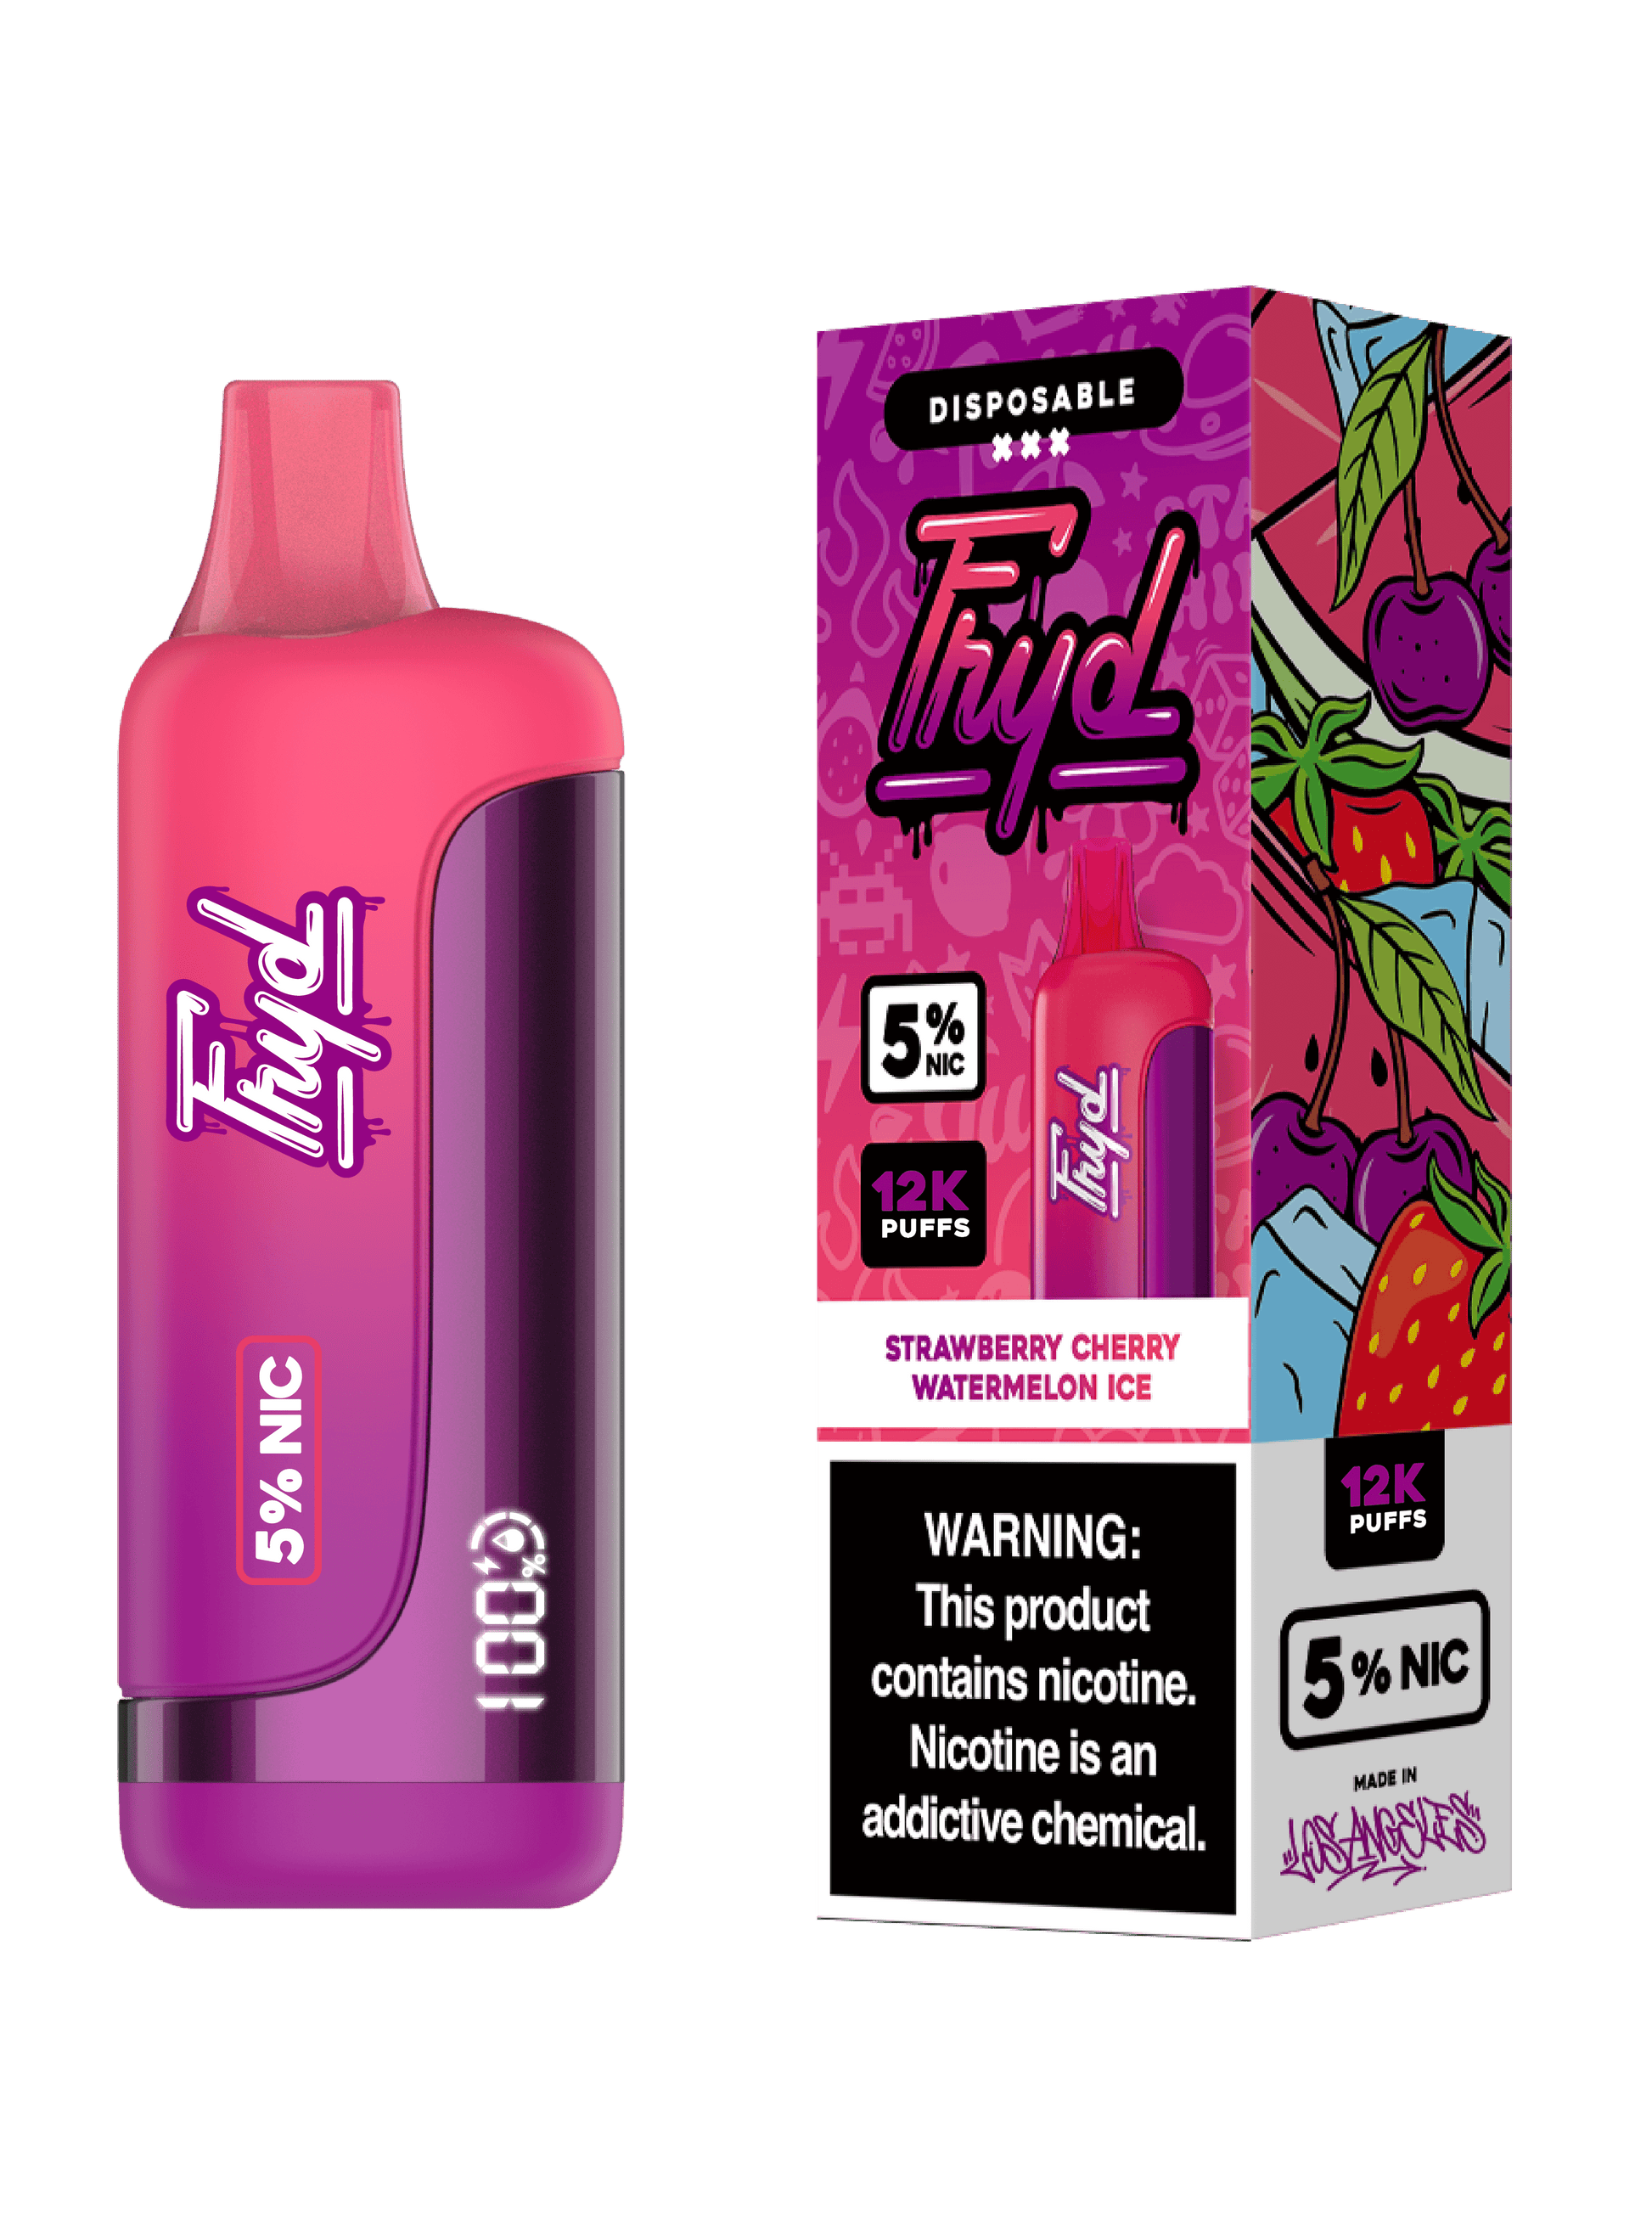 FRYD Disposable 12,0000 Puffs (17mL) 50mg Strawberry Cherry Watermelon Ice with packaging